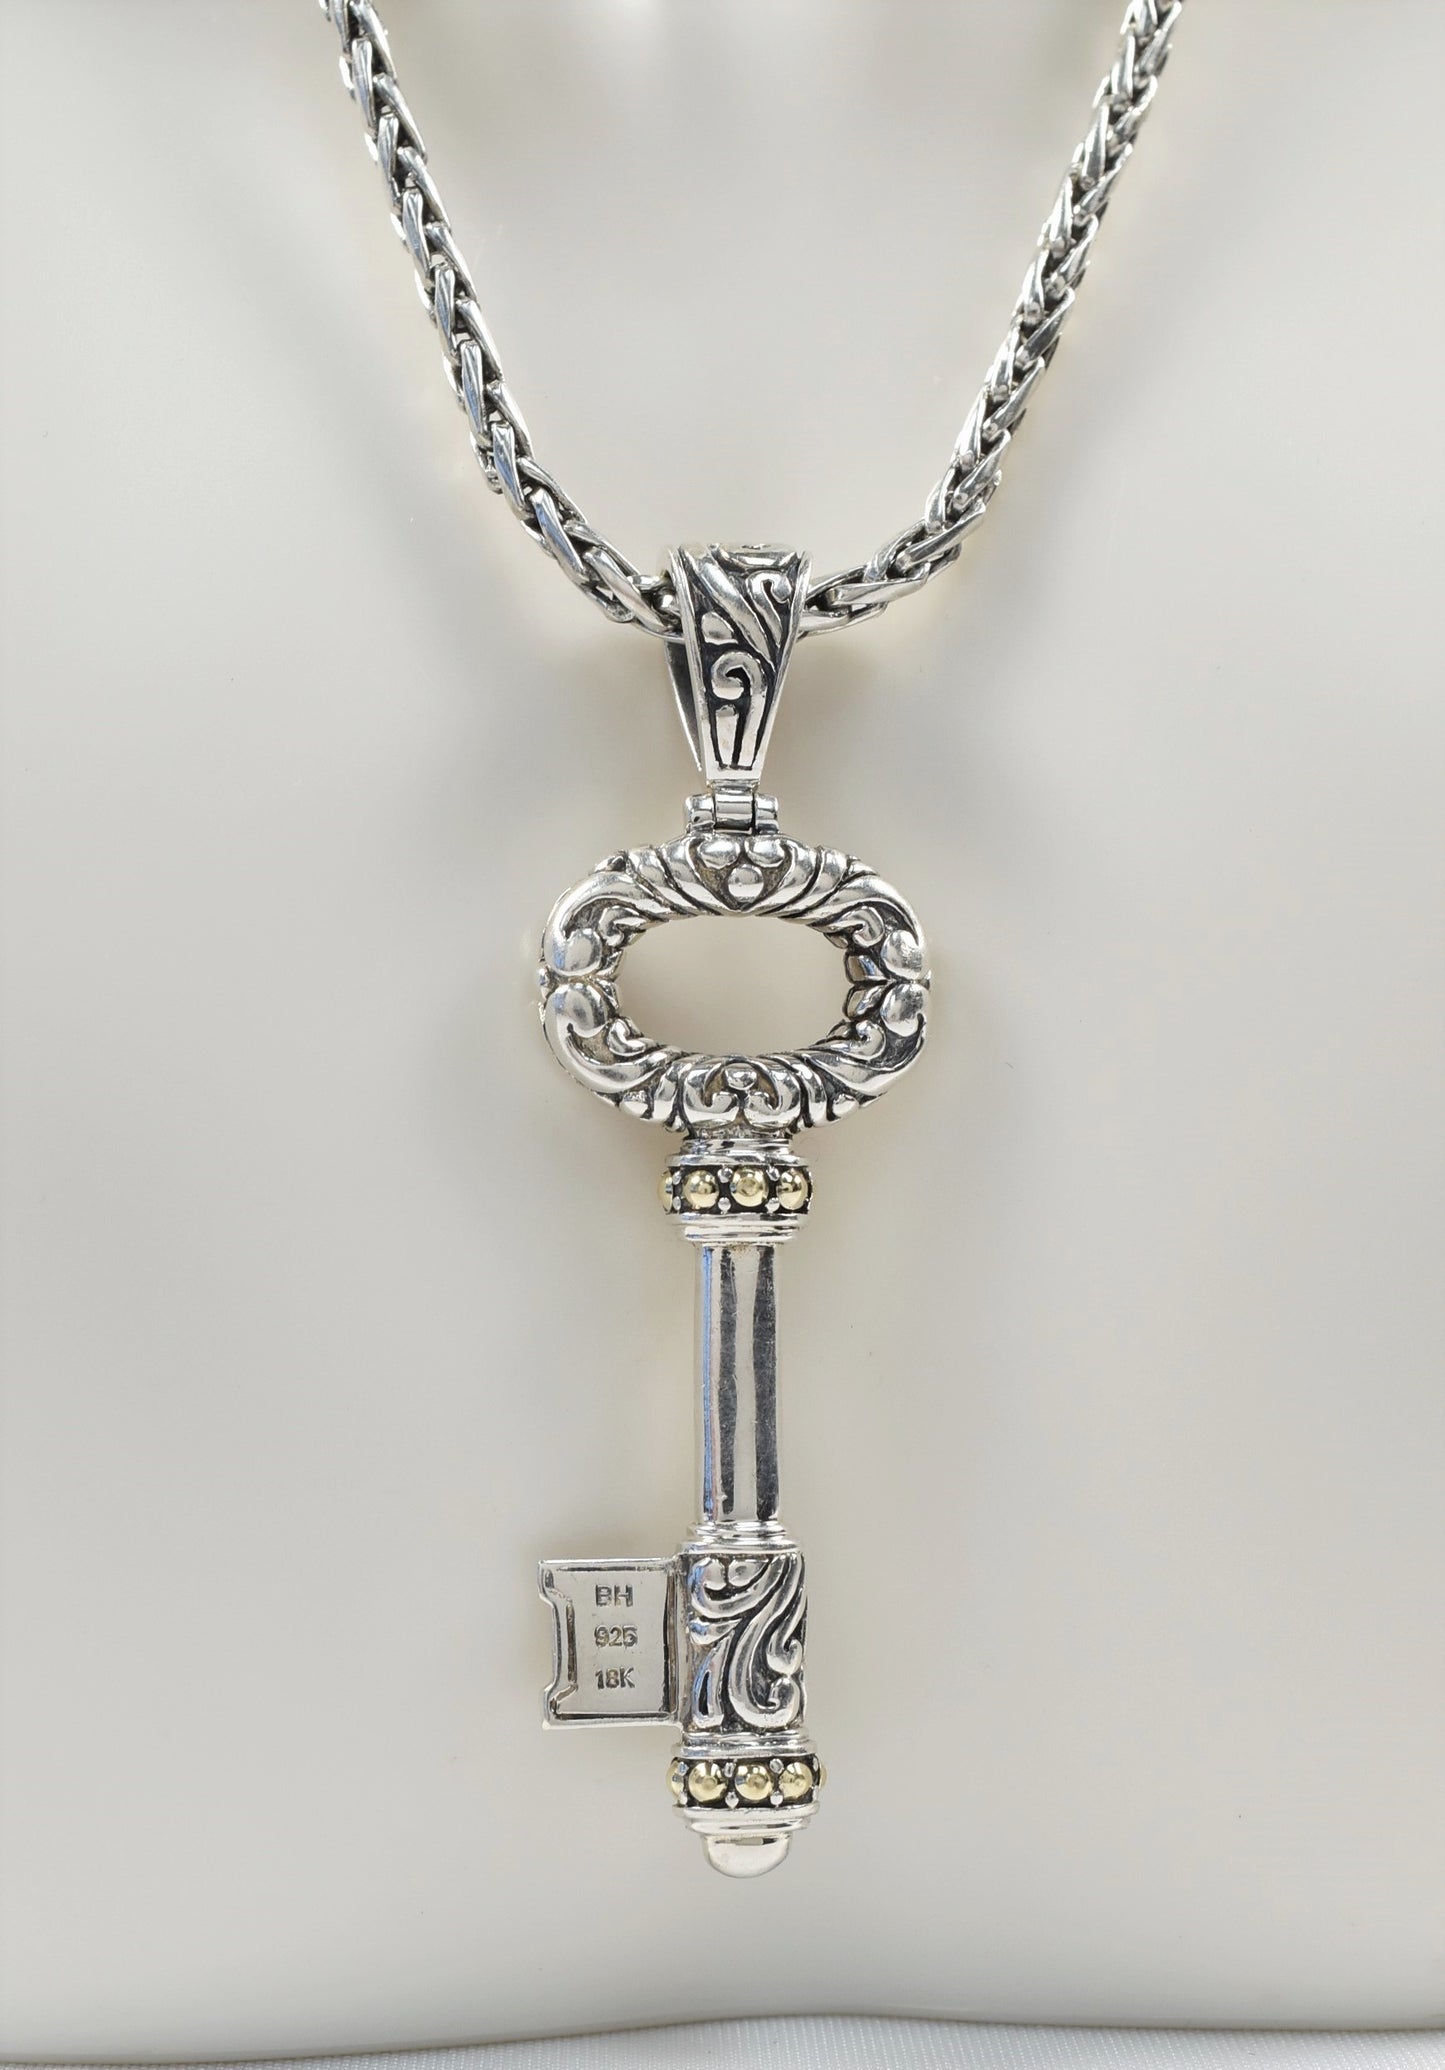 EFFY Balissima Sterling Silver & 18k Yellow Gold Large Key Pendant and Chain, 18 inch - 31.1 g